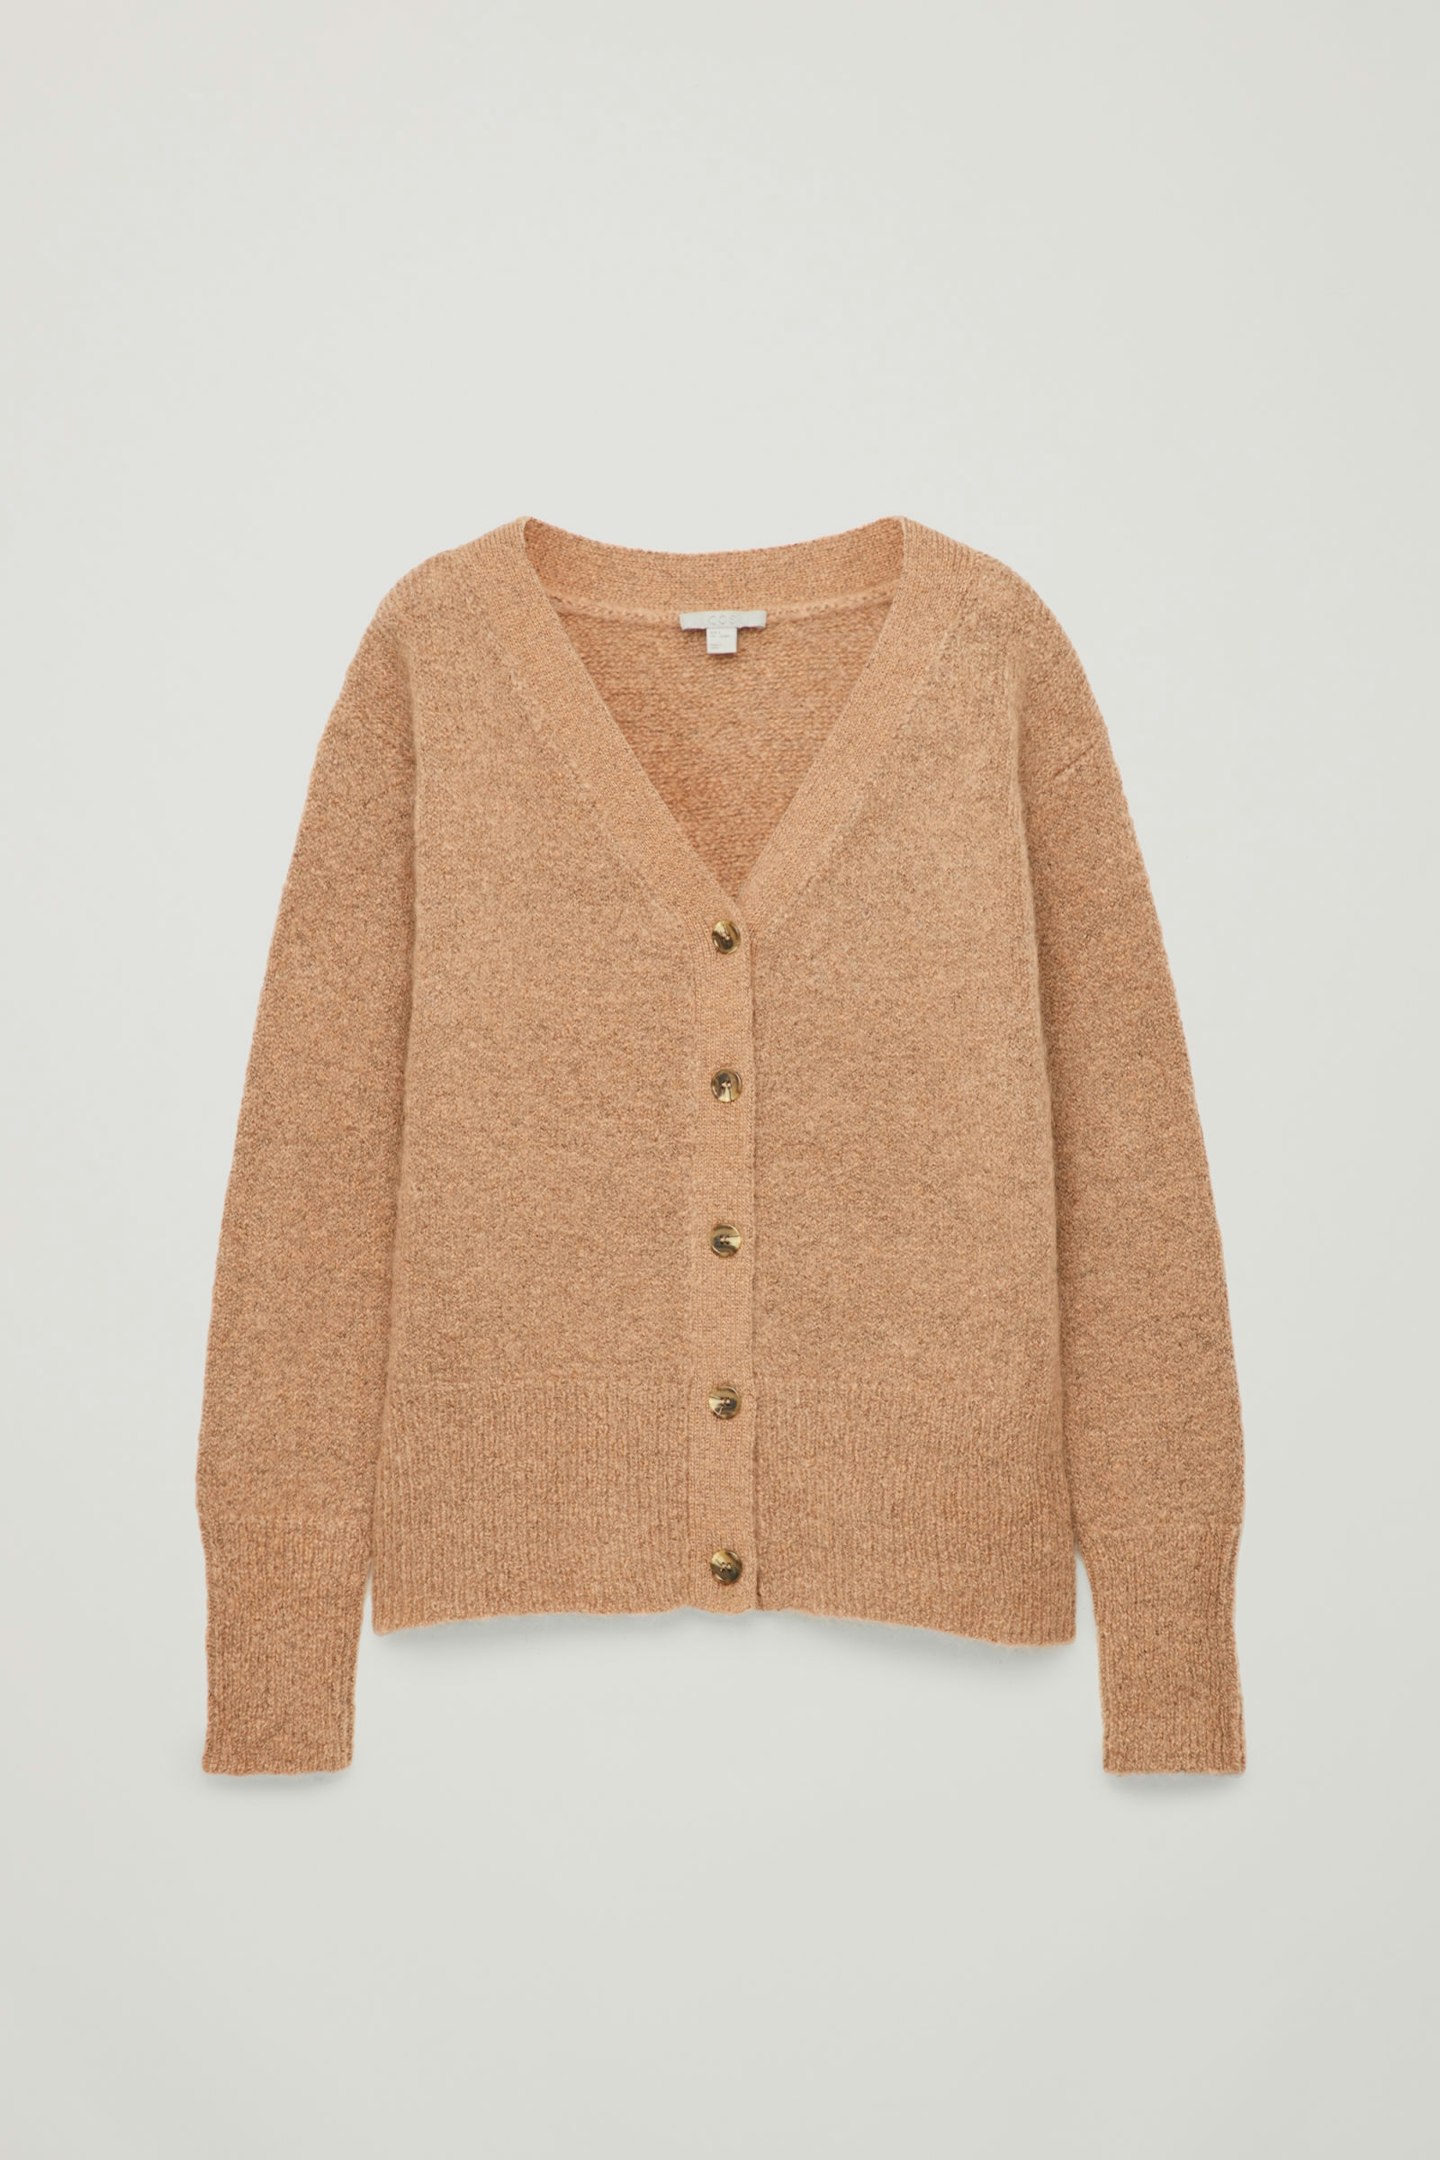 Cos, Washed Terracotta Cardigan